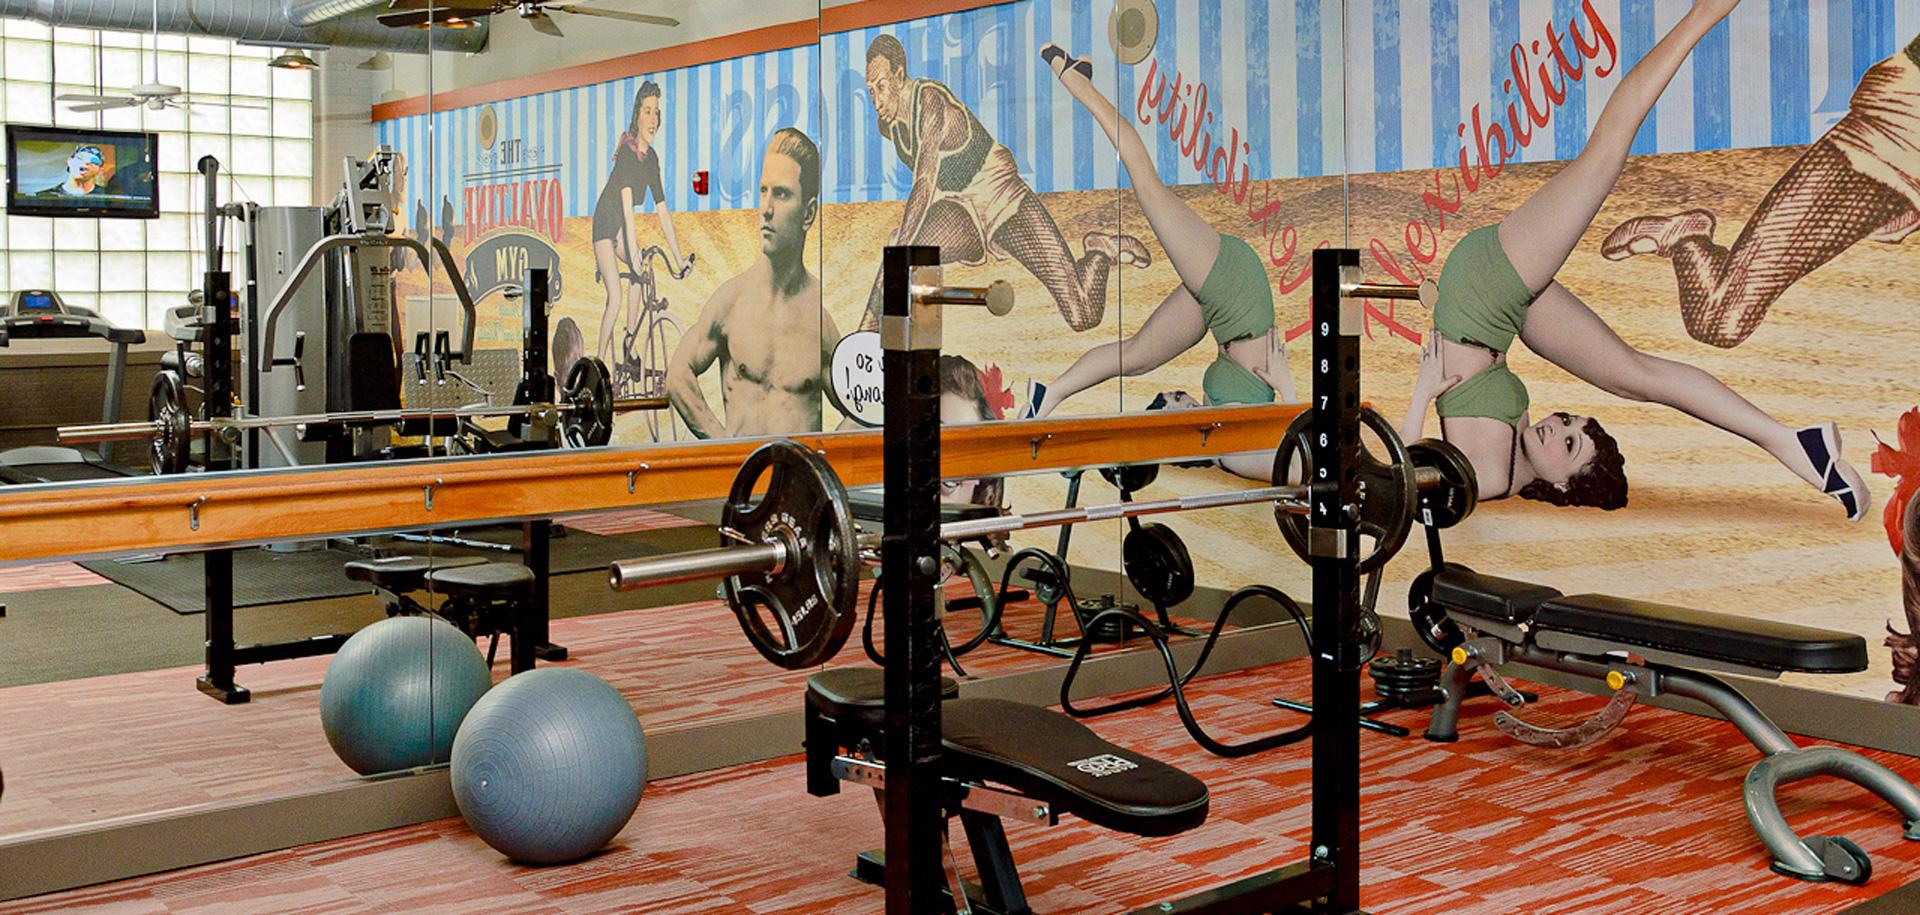 Image of the exercise room at Ovaltine Court